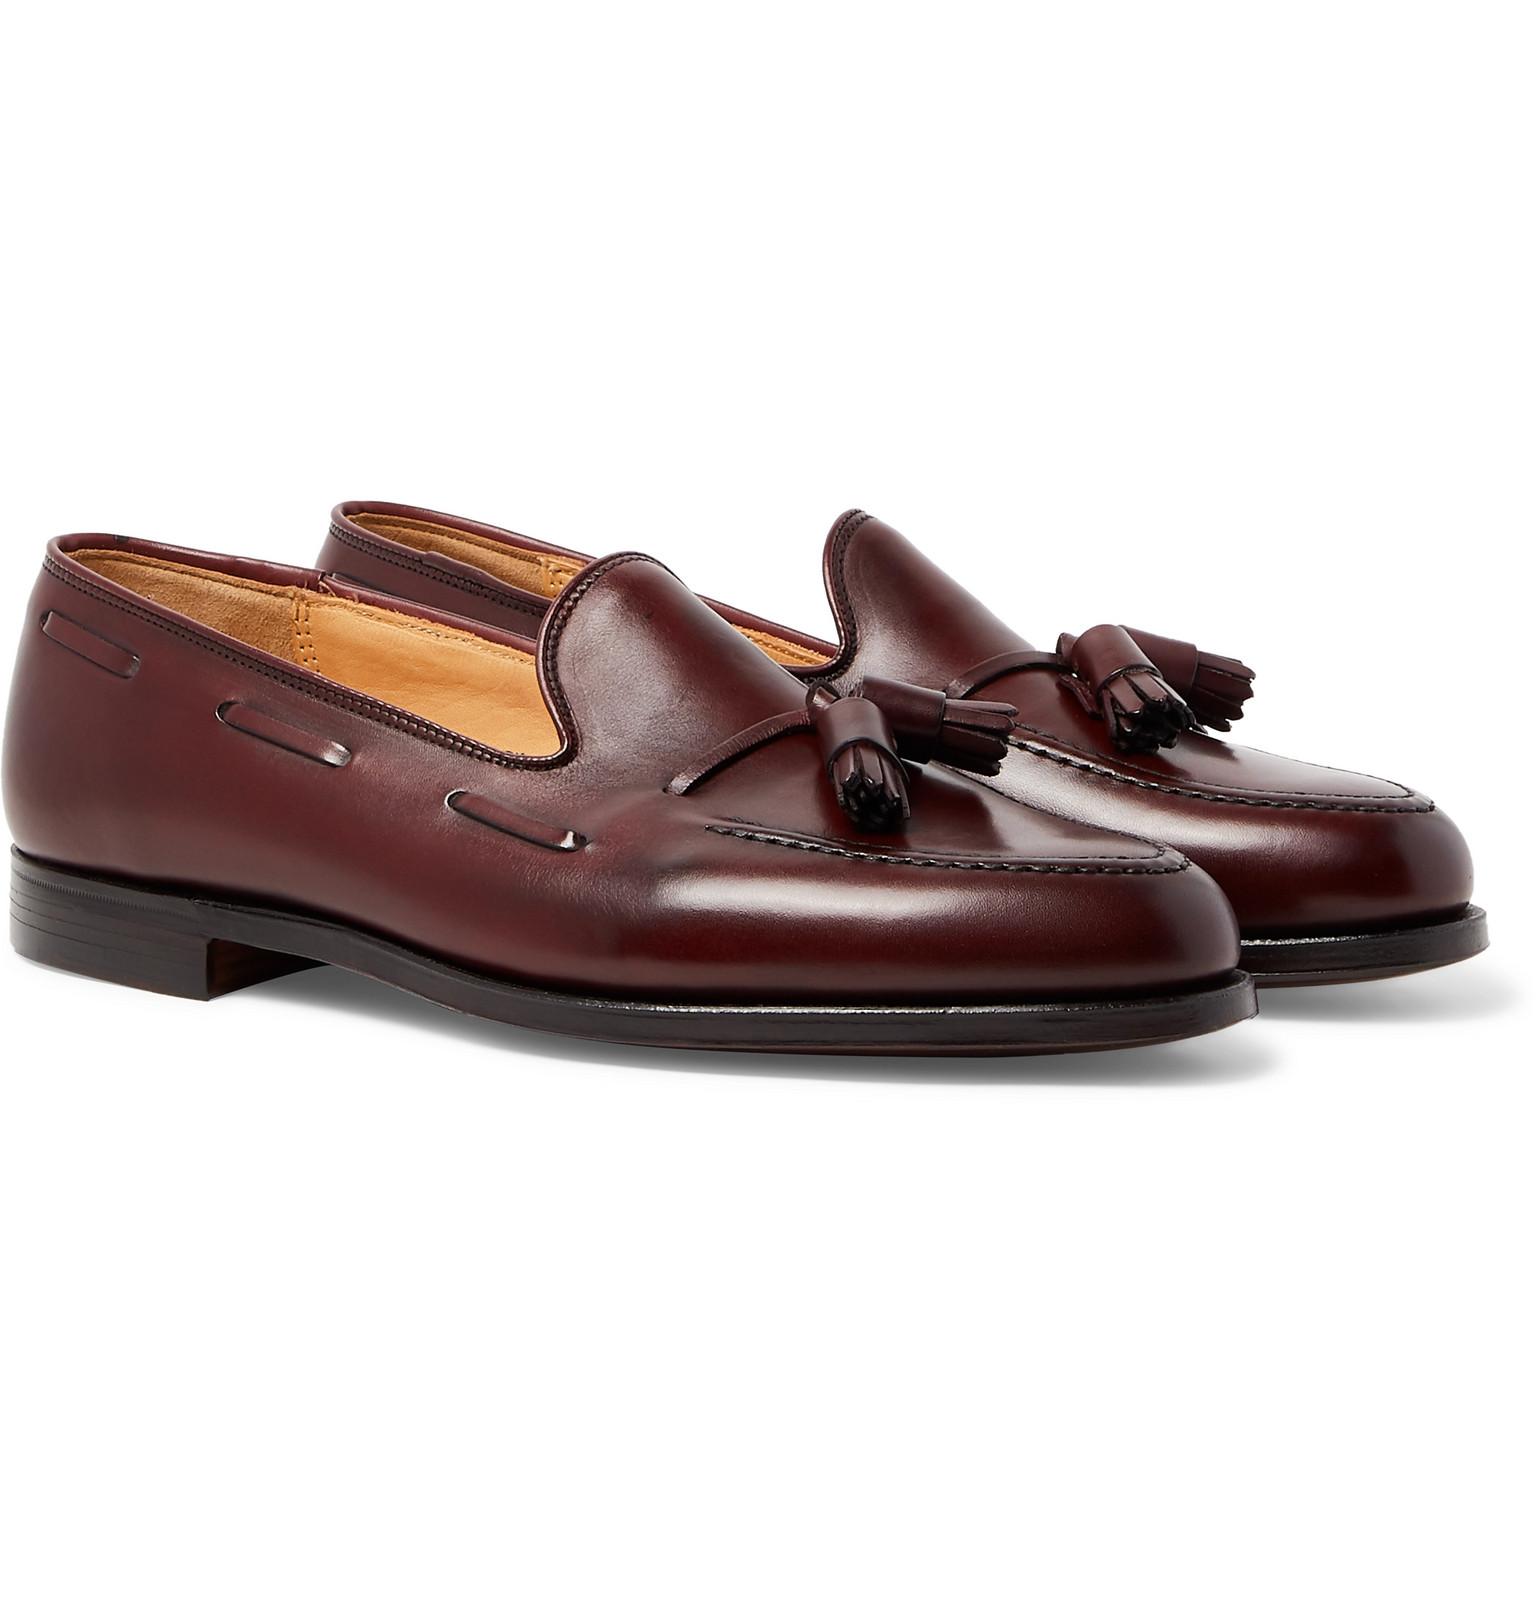 George Cleverley Leather Gabriel Suede Tasselled Loafers for Men - Lyst